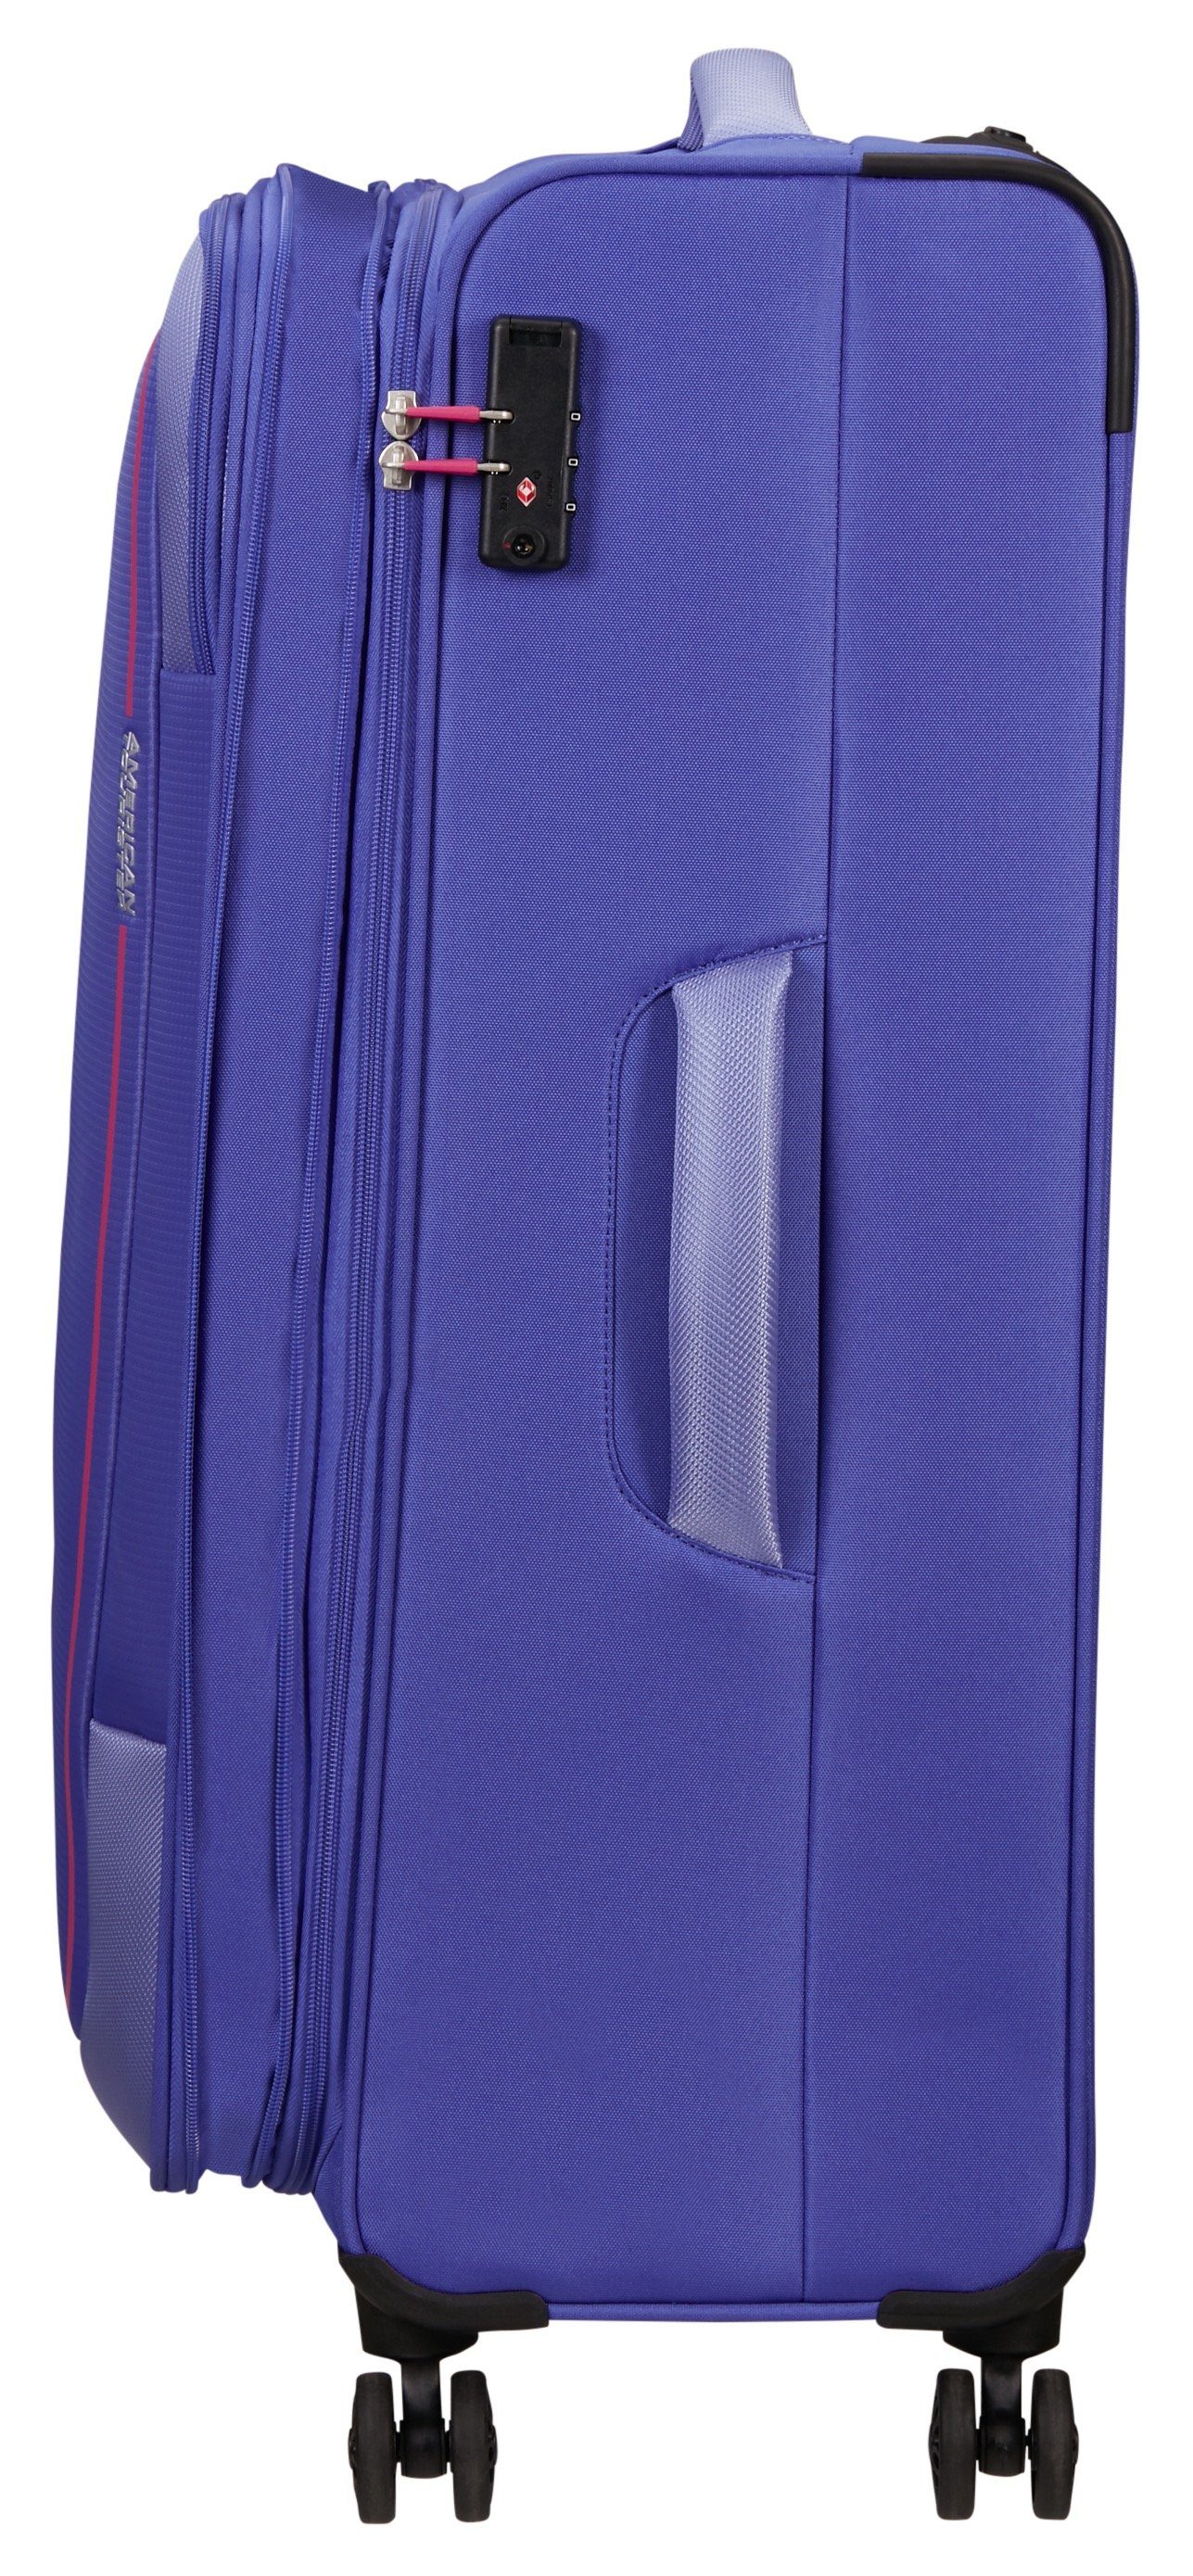 80, PULSONIC Tourister® Spinner lilac Rollen soft 4 Koffer American